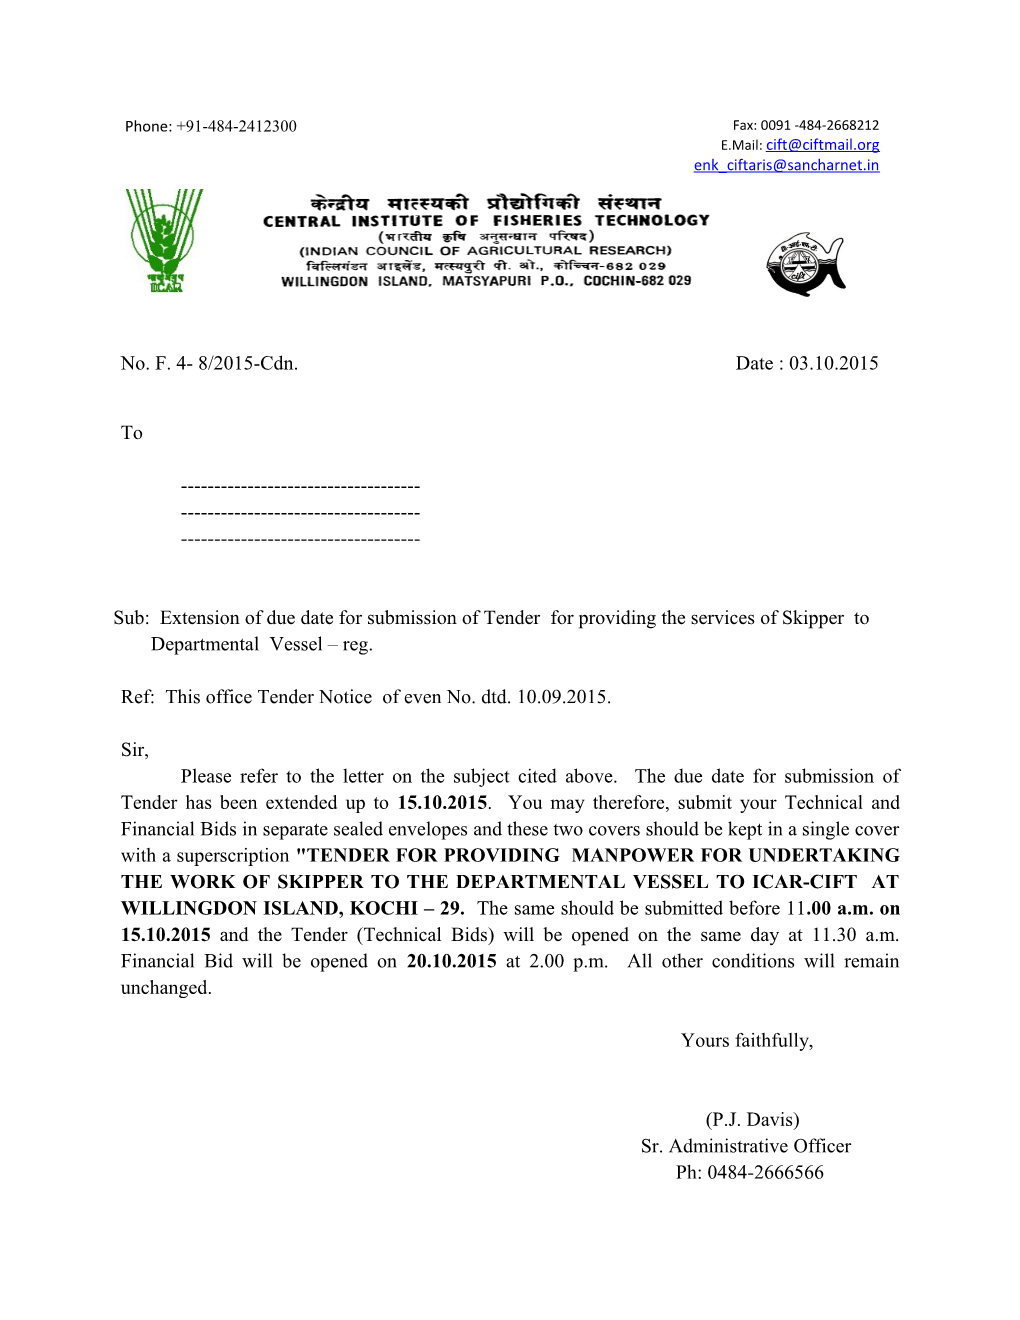 Ref: This Office Tender Notice of Even No. Dtd. 10.09.2015